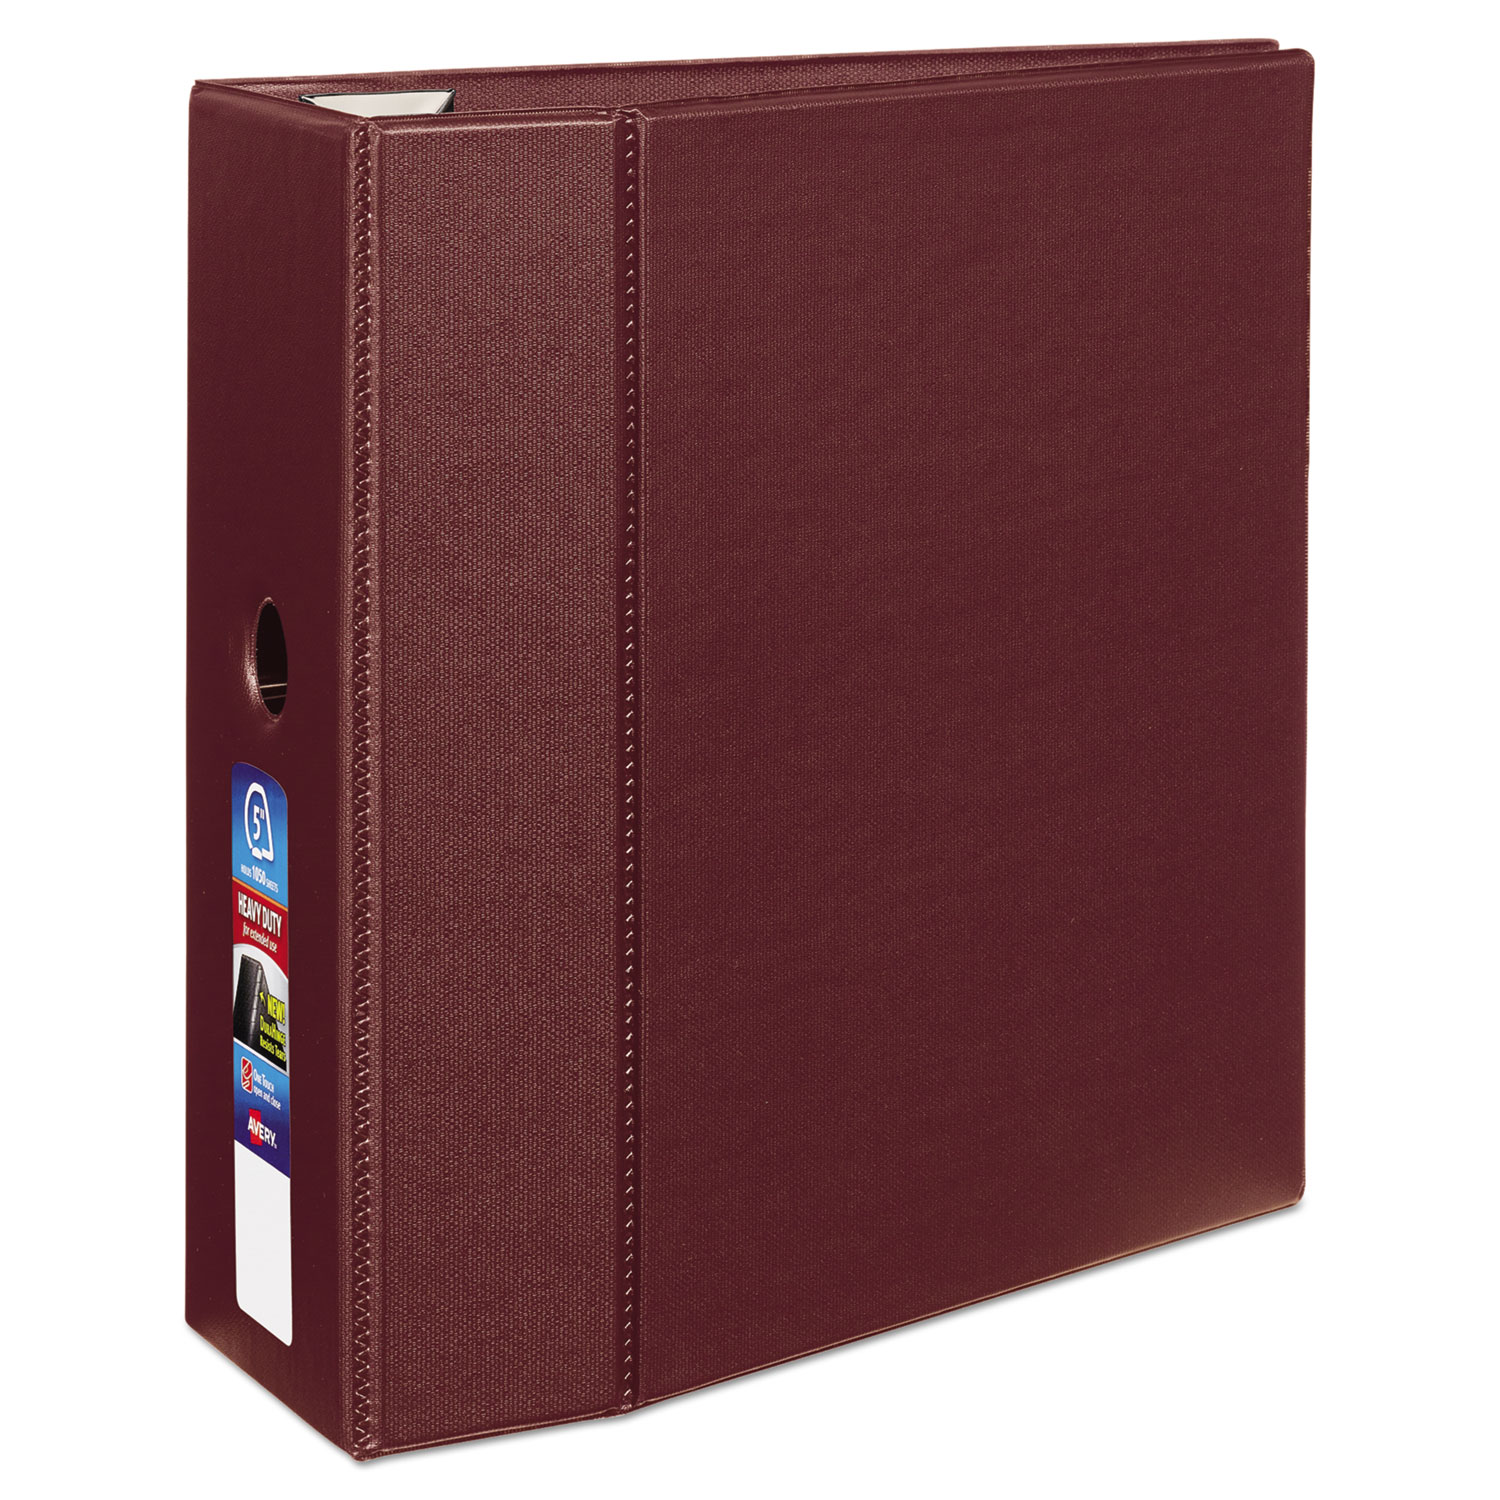  Avery 79366 Heavy-Duty Non-View Binder with DuraHinge and Locking One Touch EZD Rings, 3 Rings, 5 Capacity, 11 x 8.5, Maroon (AVE79366) 